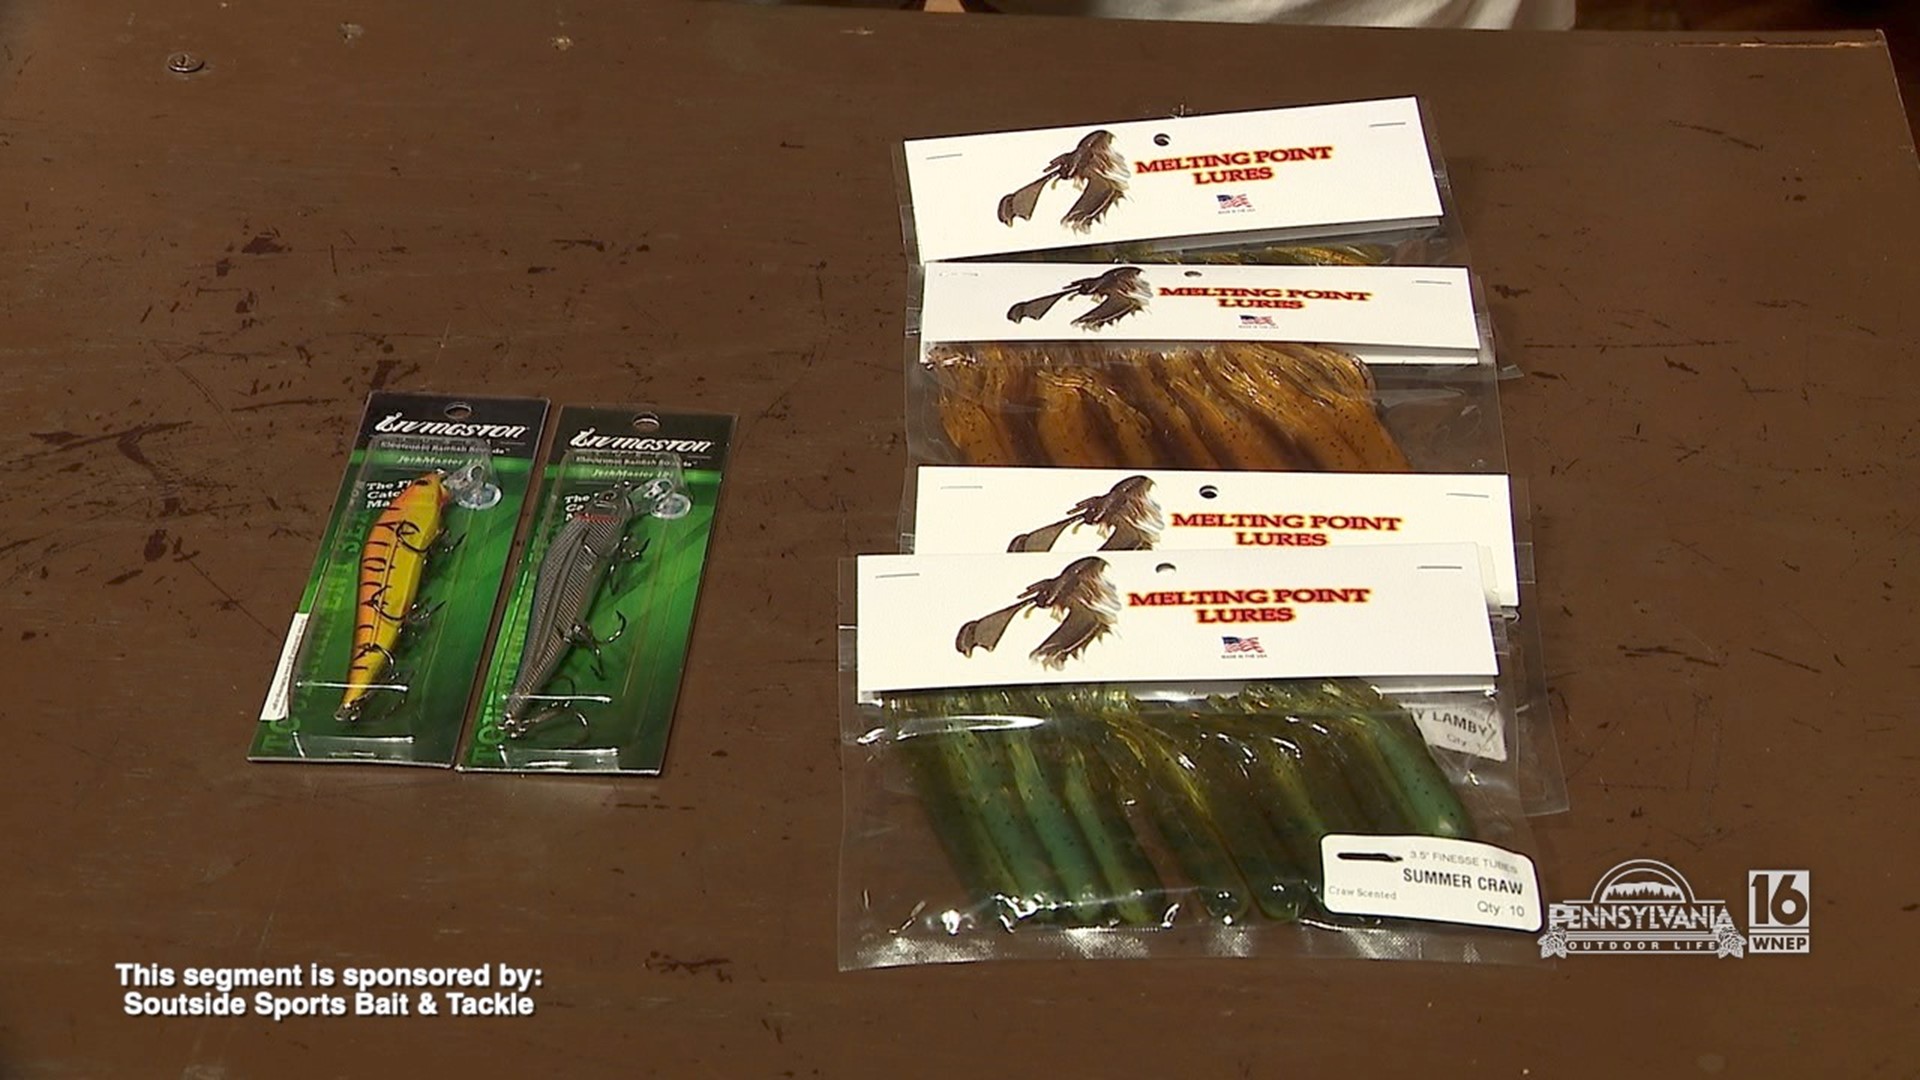 A great collection of fishing lures from local companies.